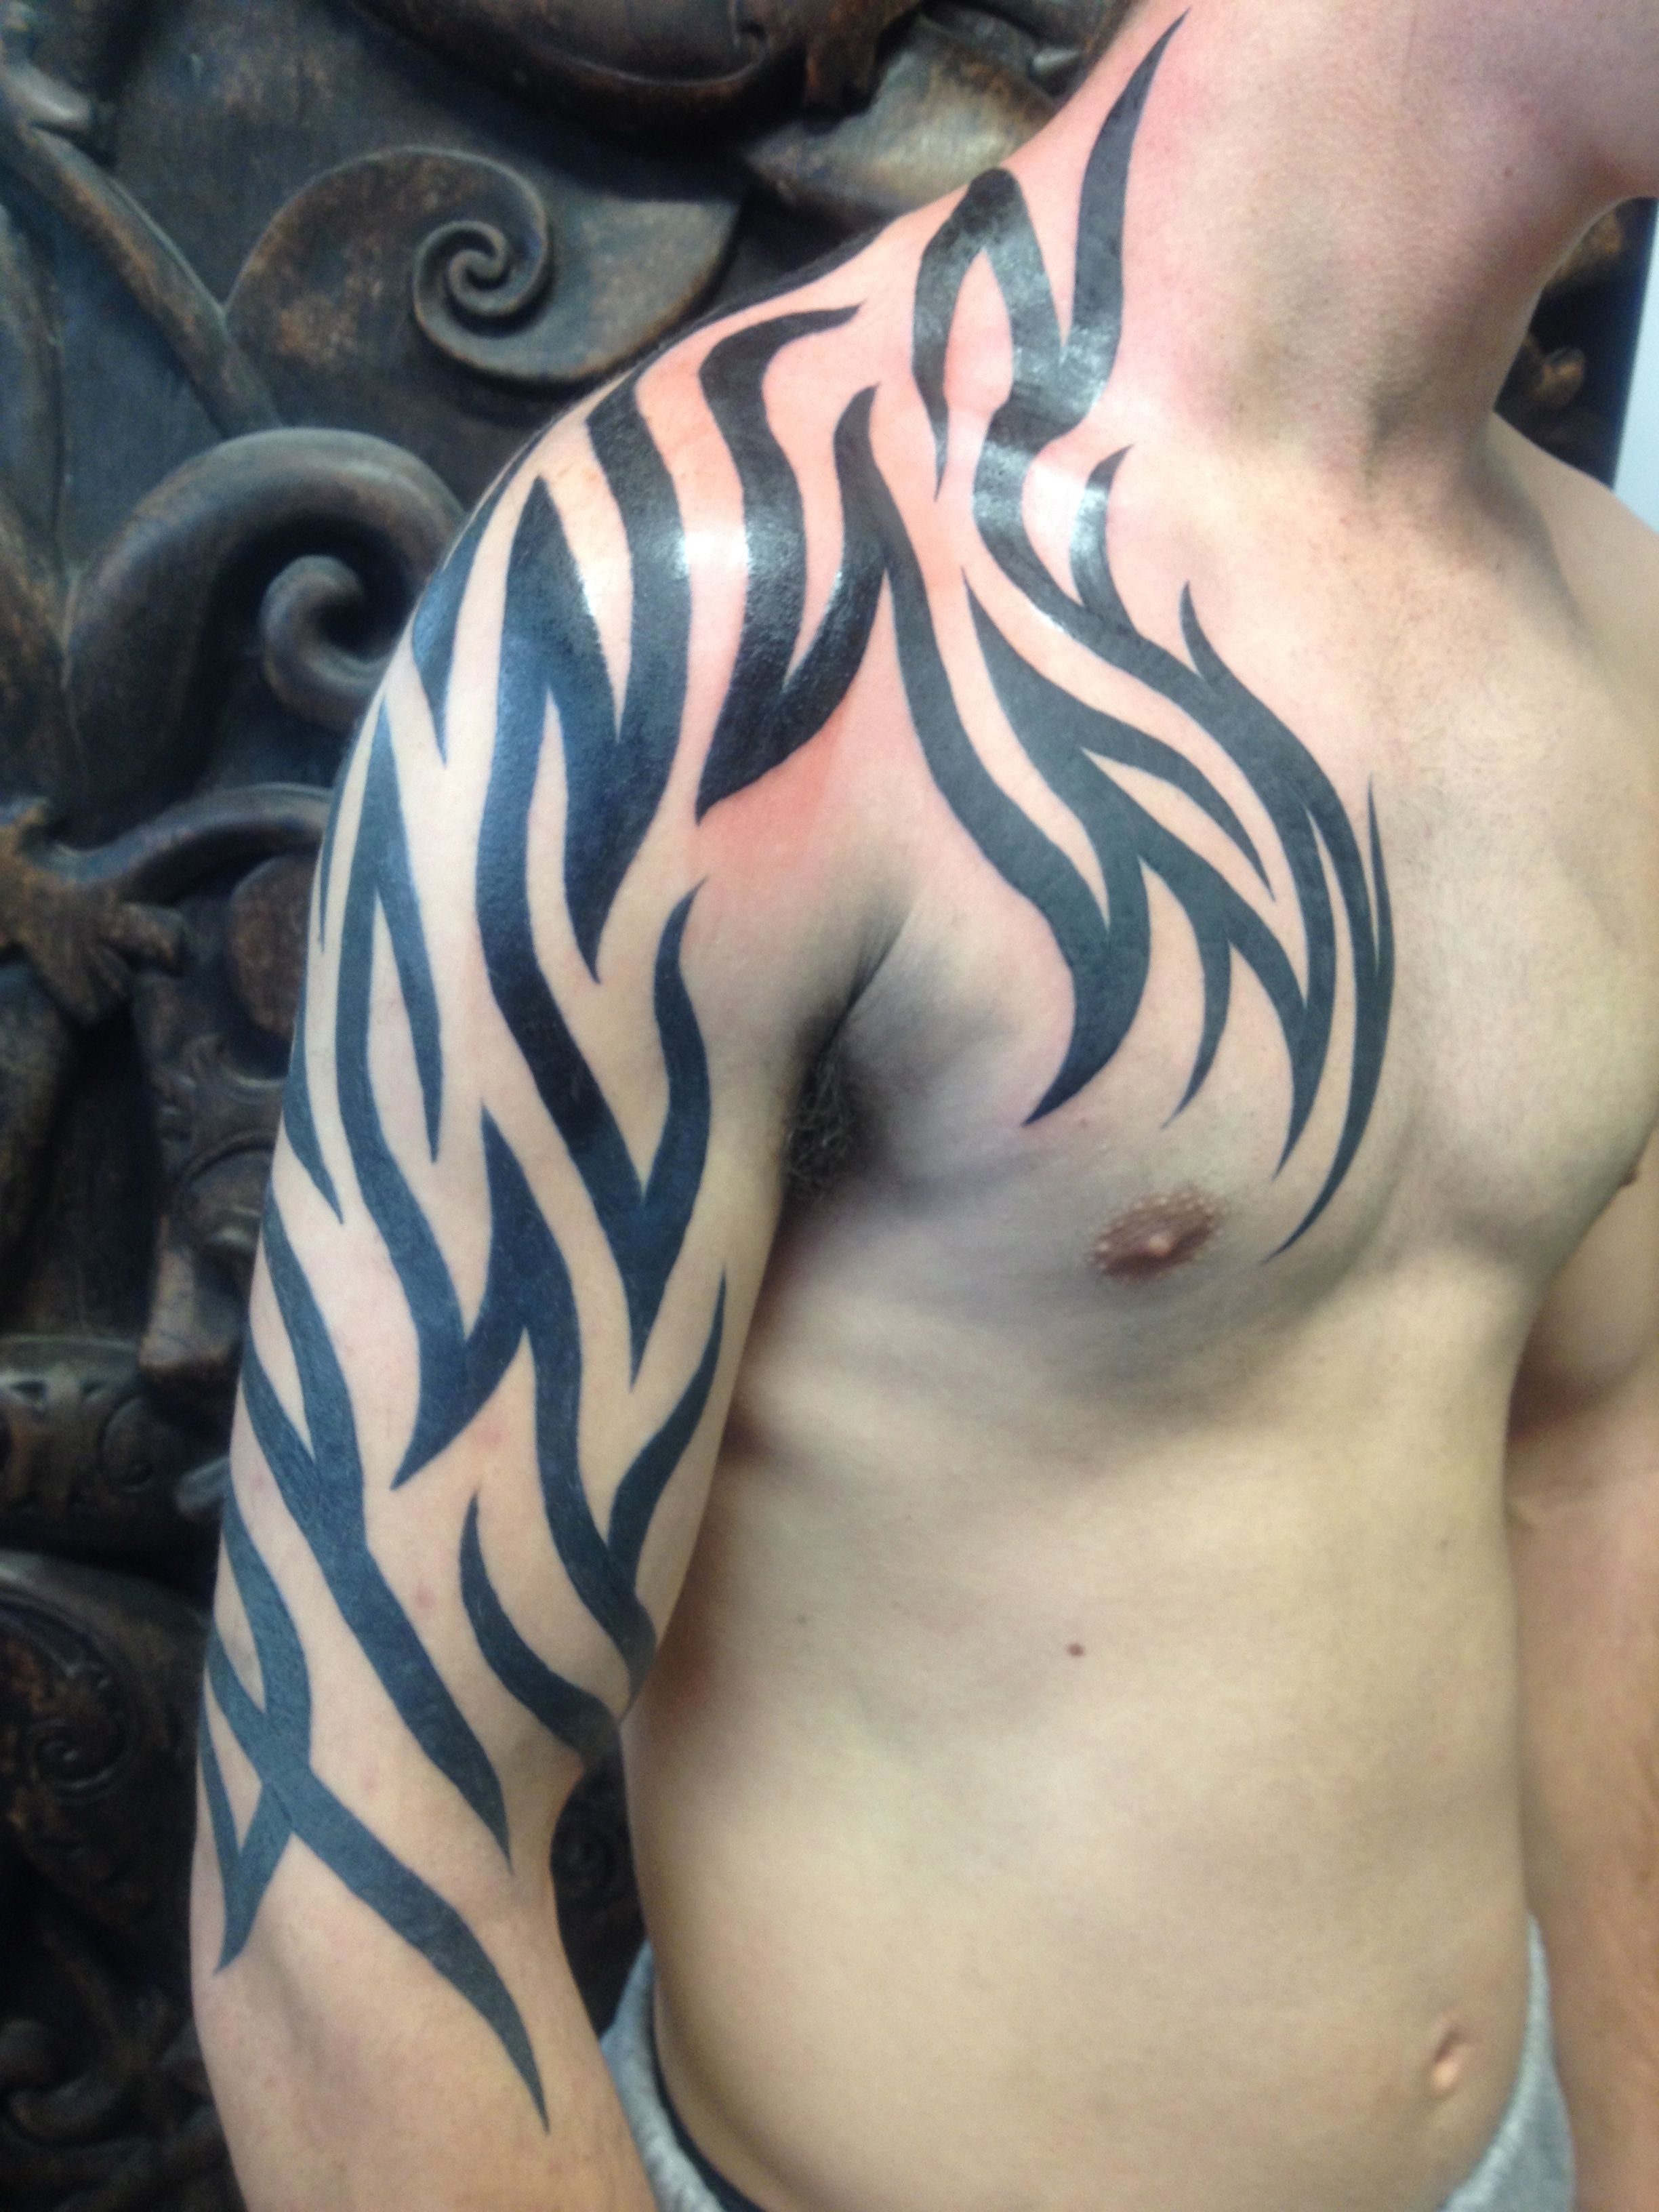 Best Tribal Arm Tattoo Designs for Men - The Xerxes